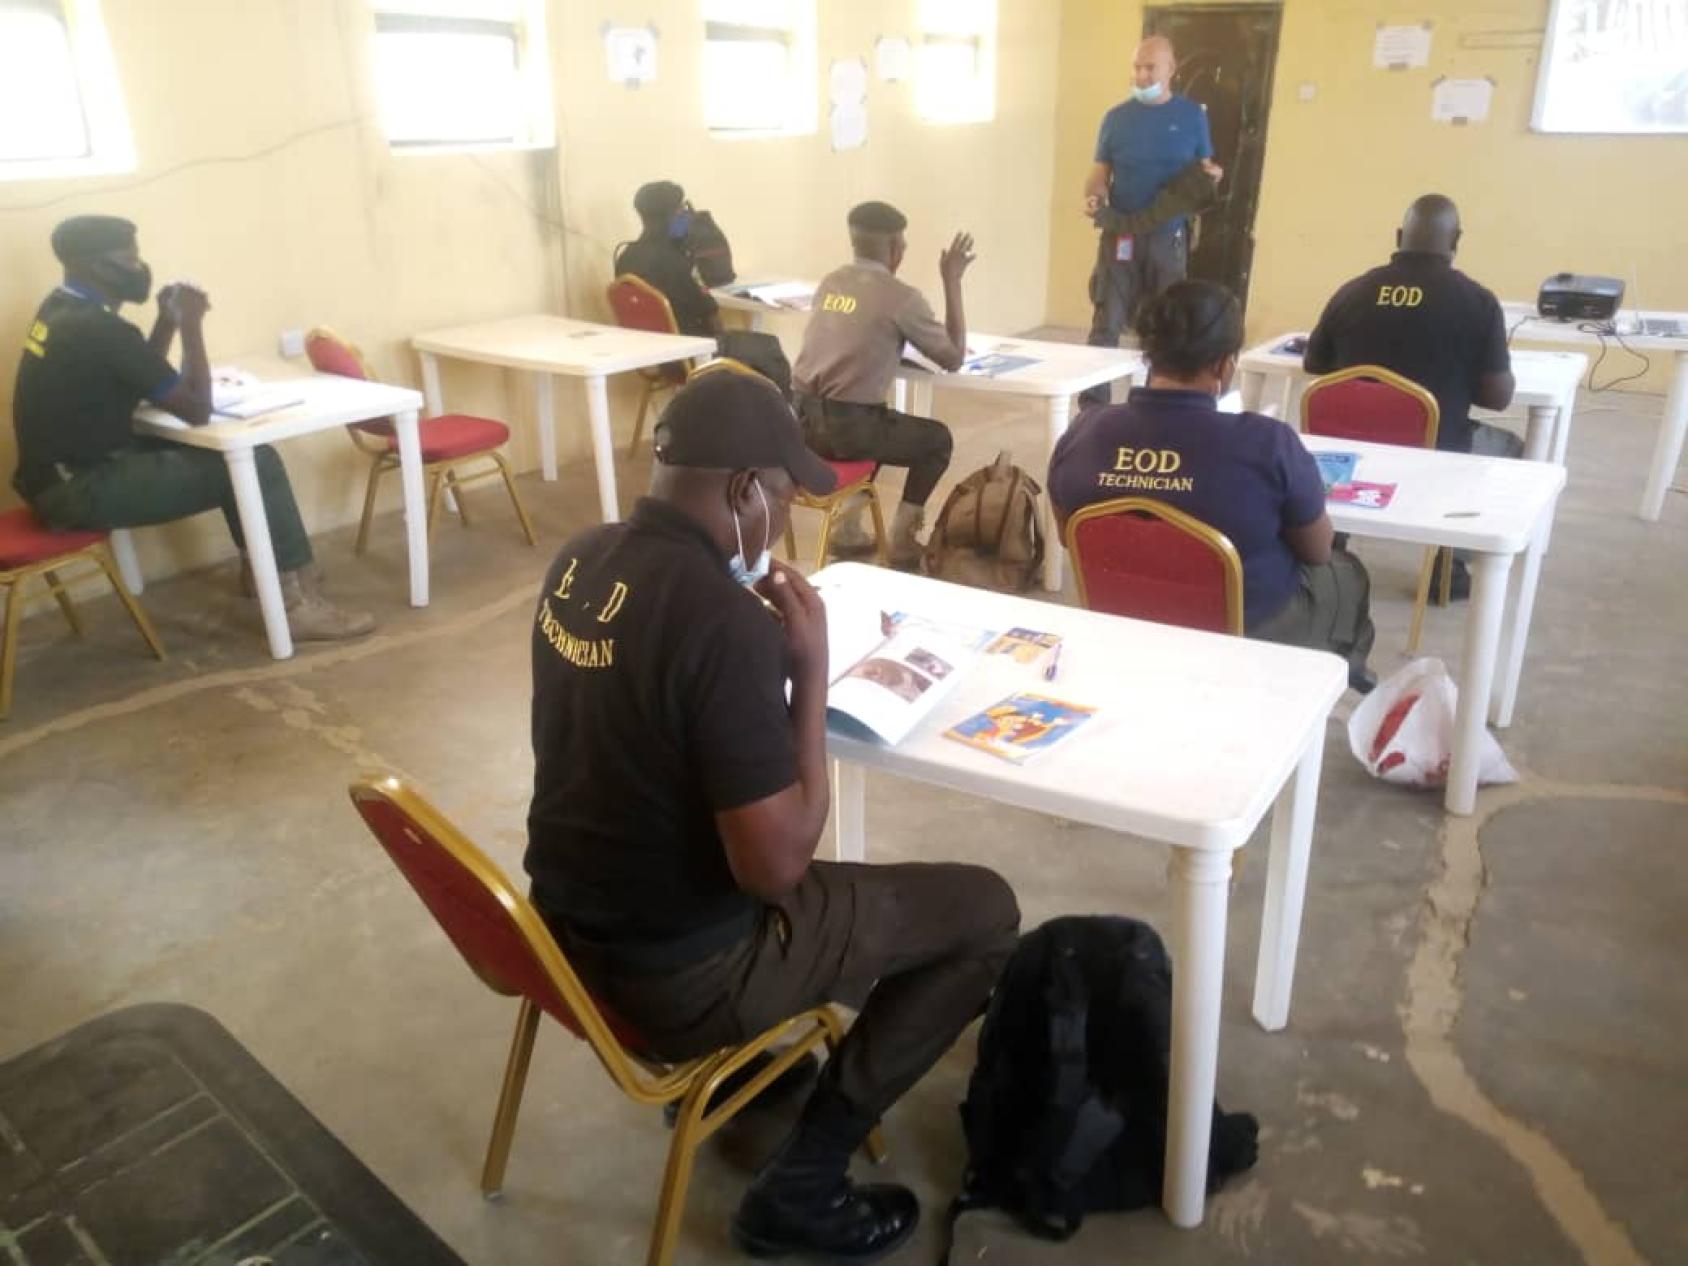 National security officers sit in socially distanced desks in a classroom.